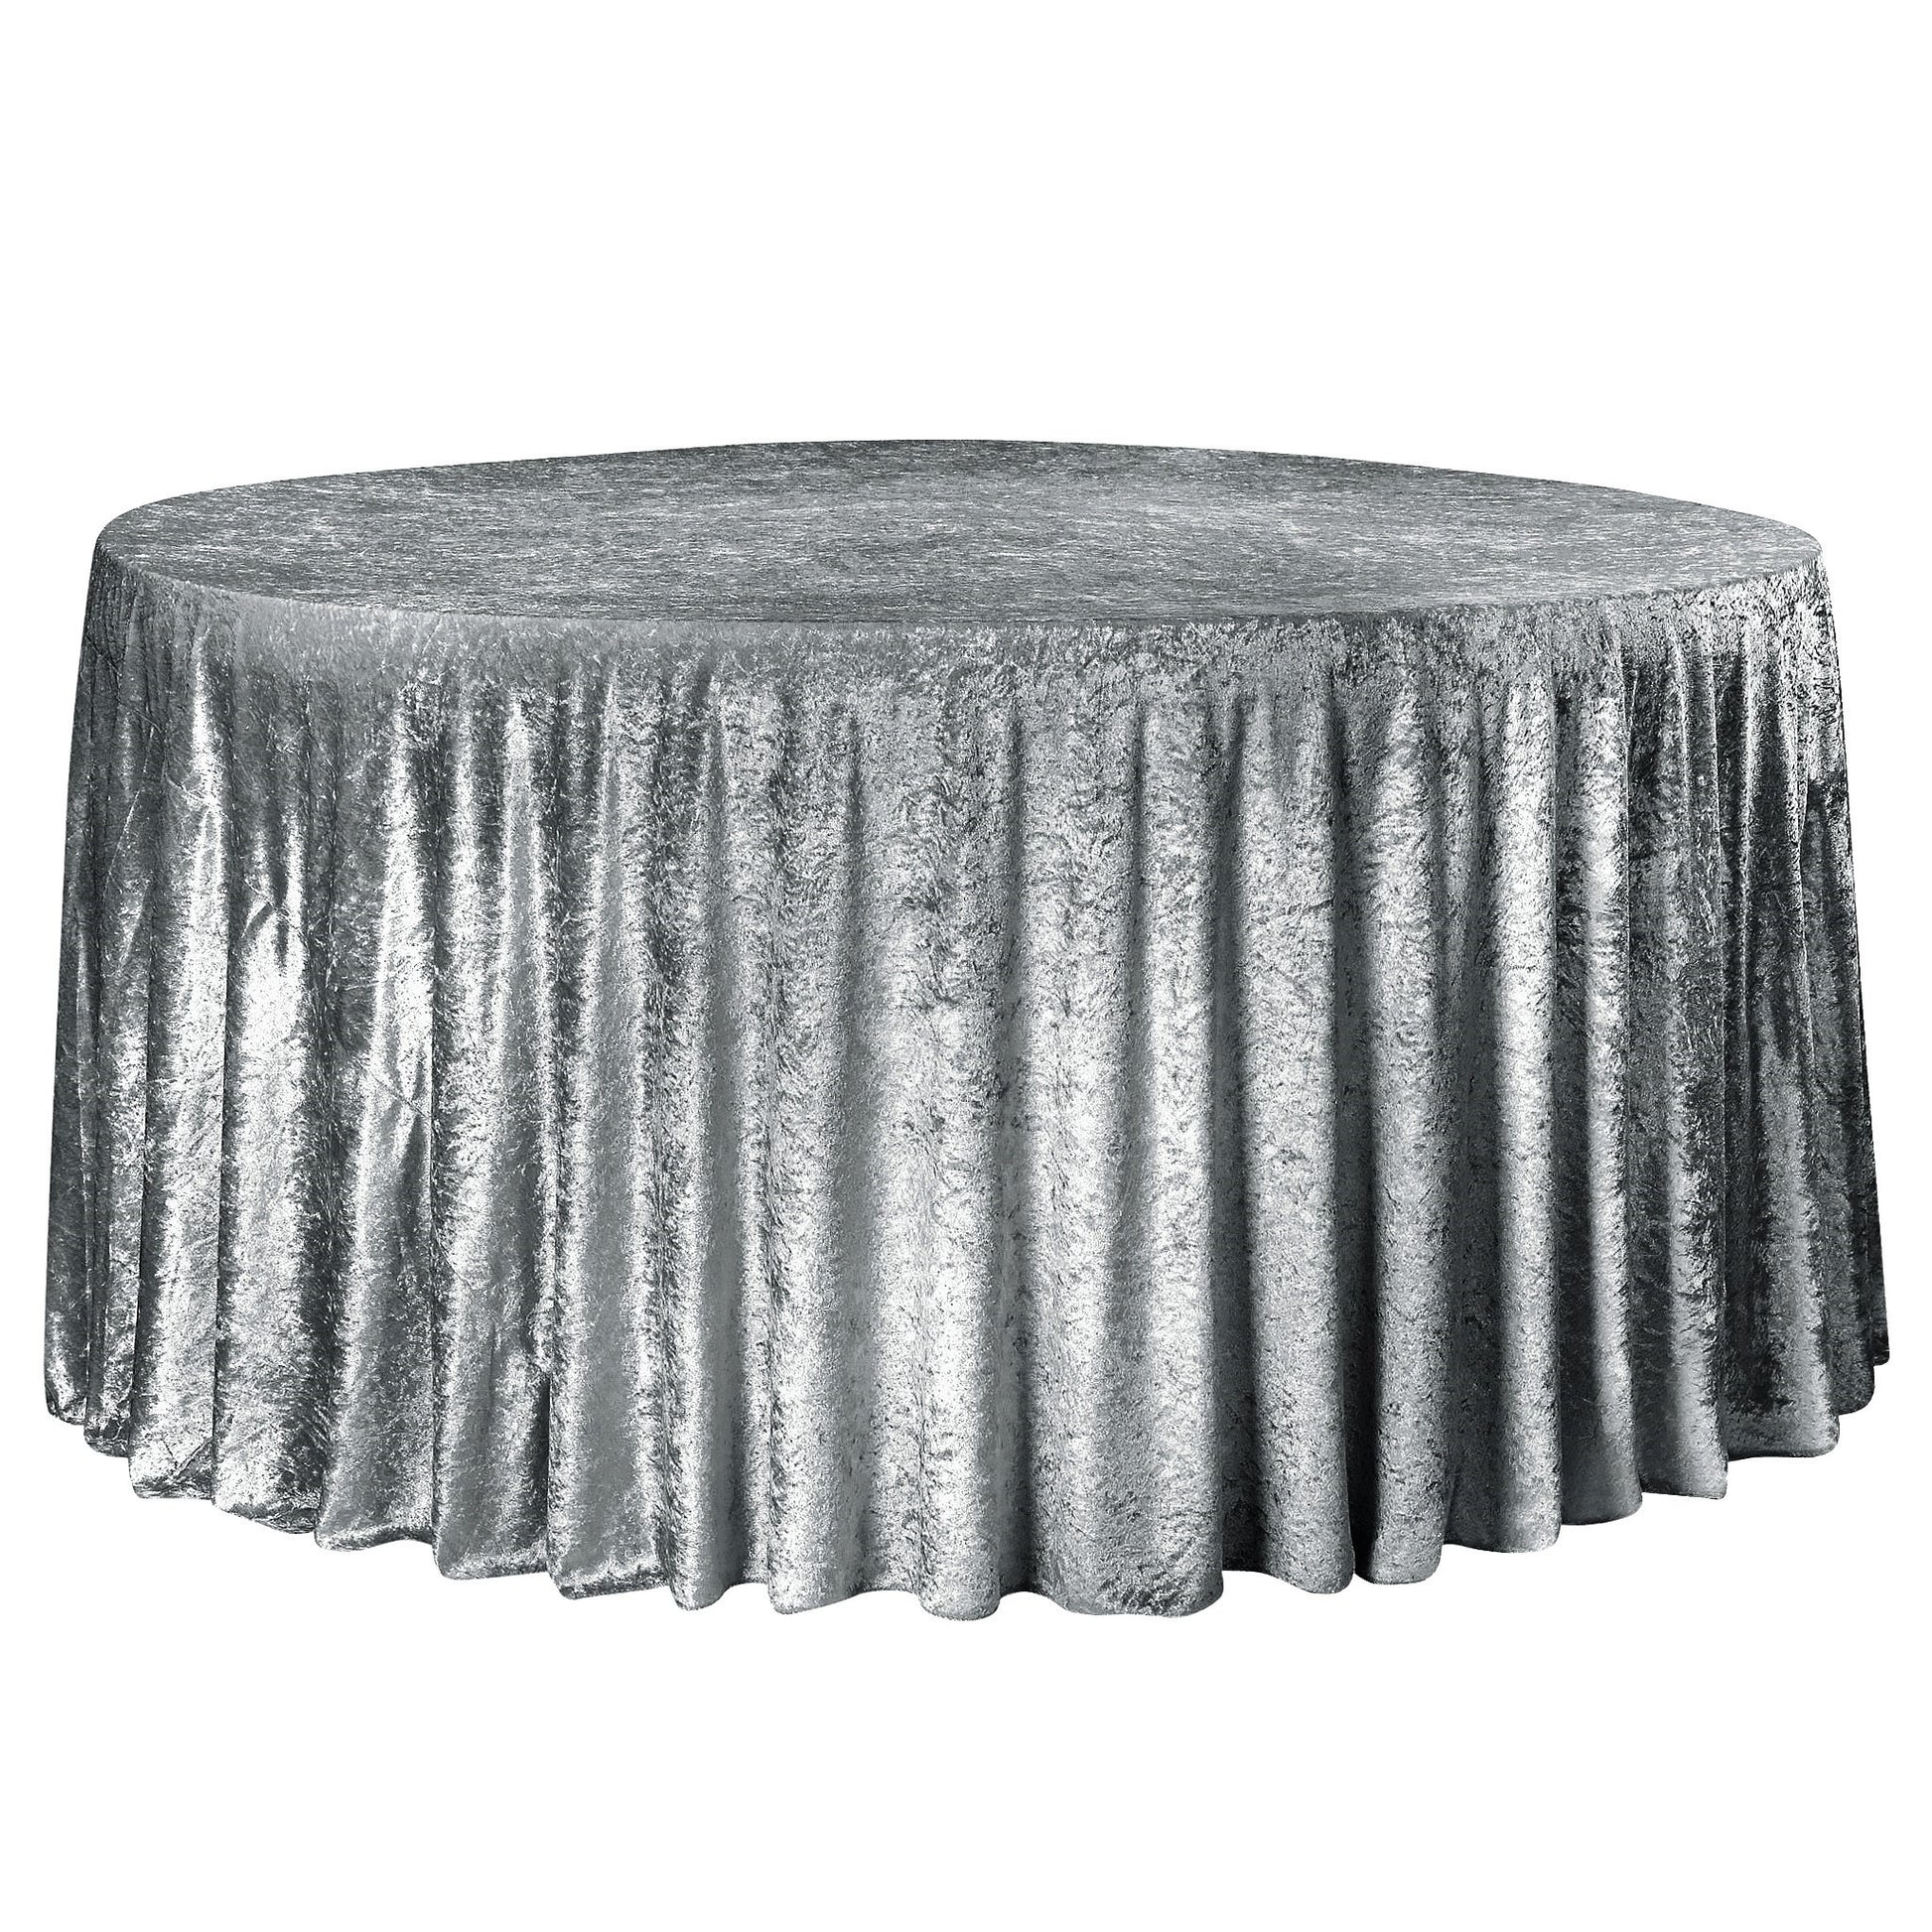 Velvet 132" Round Tablecloth - Charcoal